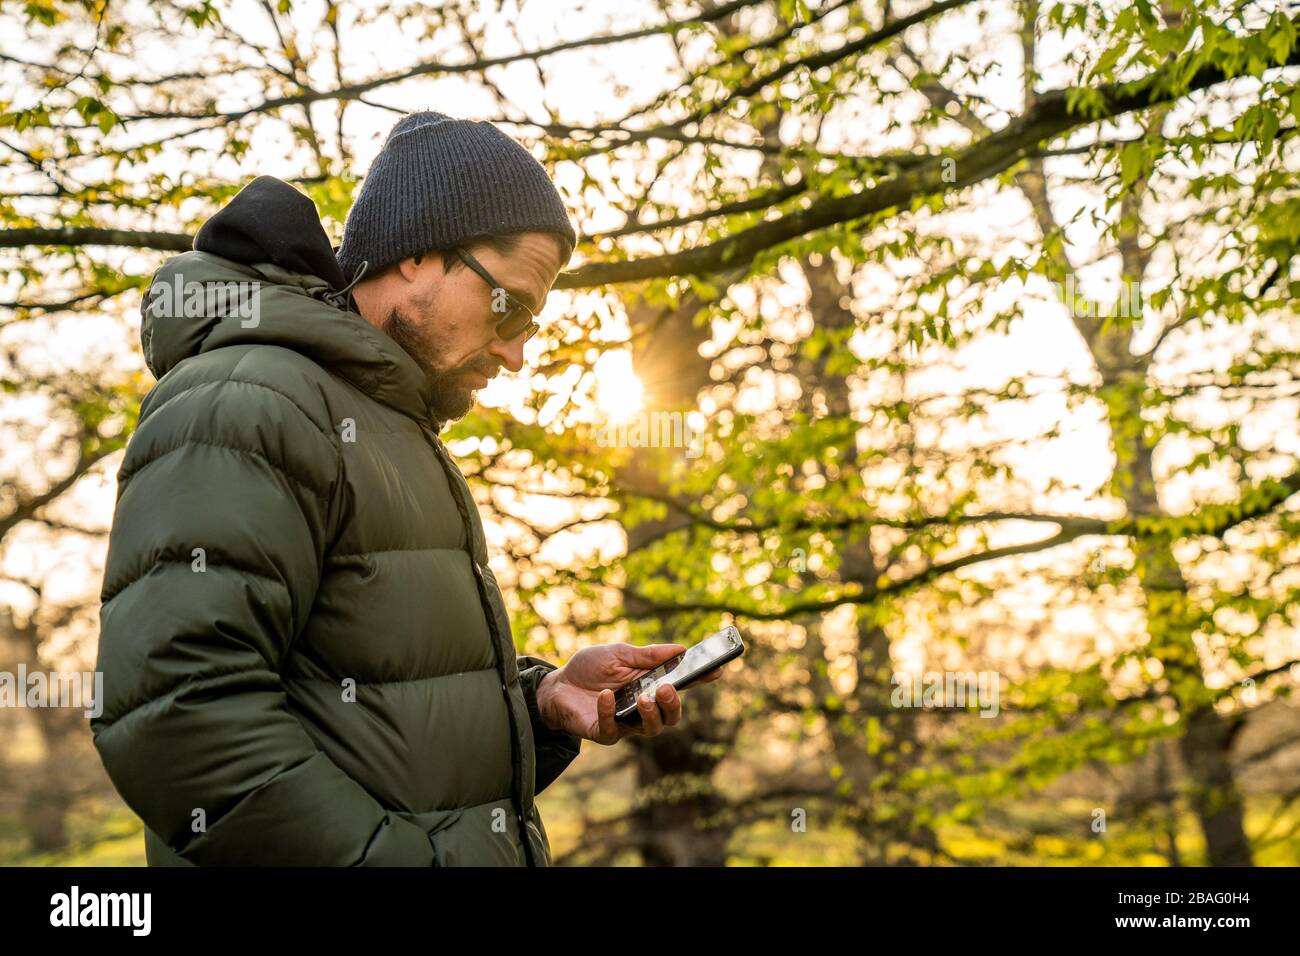 Social distance exercising in Greenwich Park.  Mid 40's male looking at phone. Stock Photo